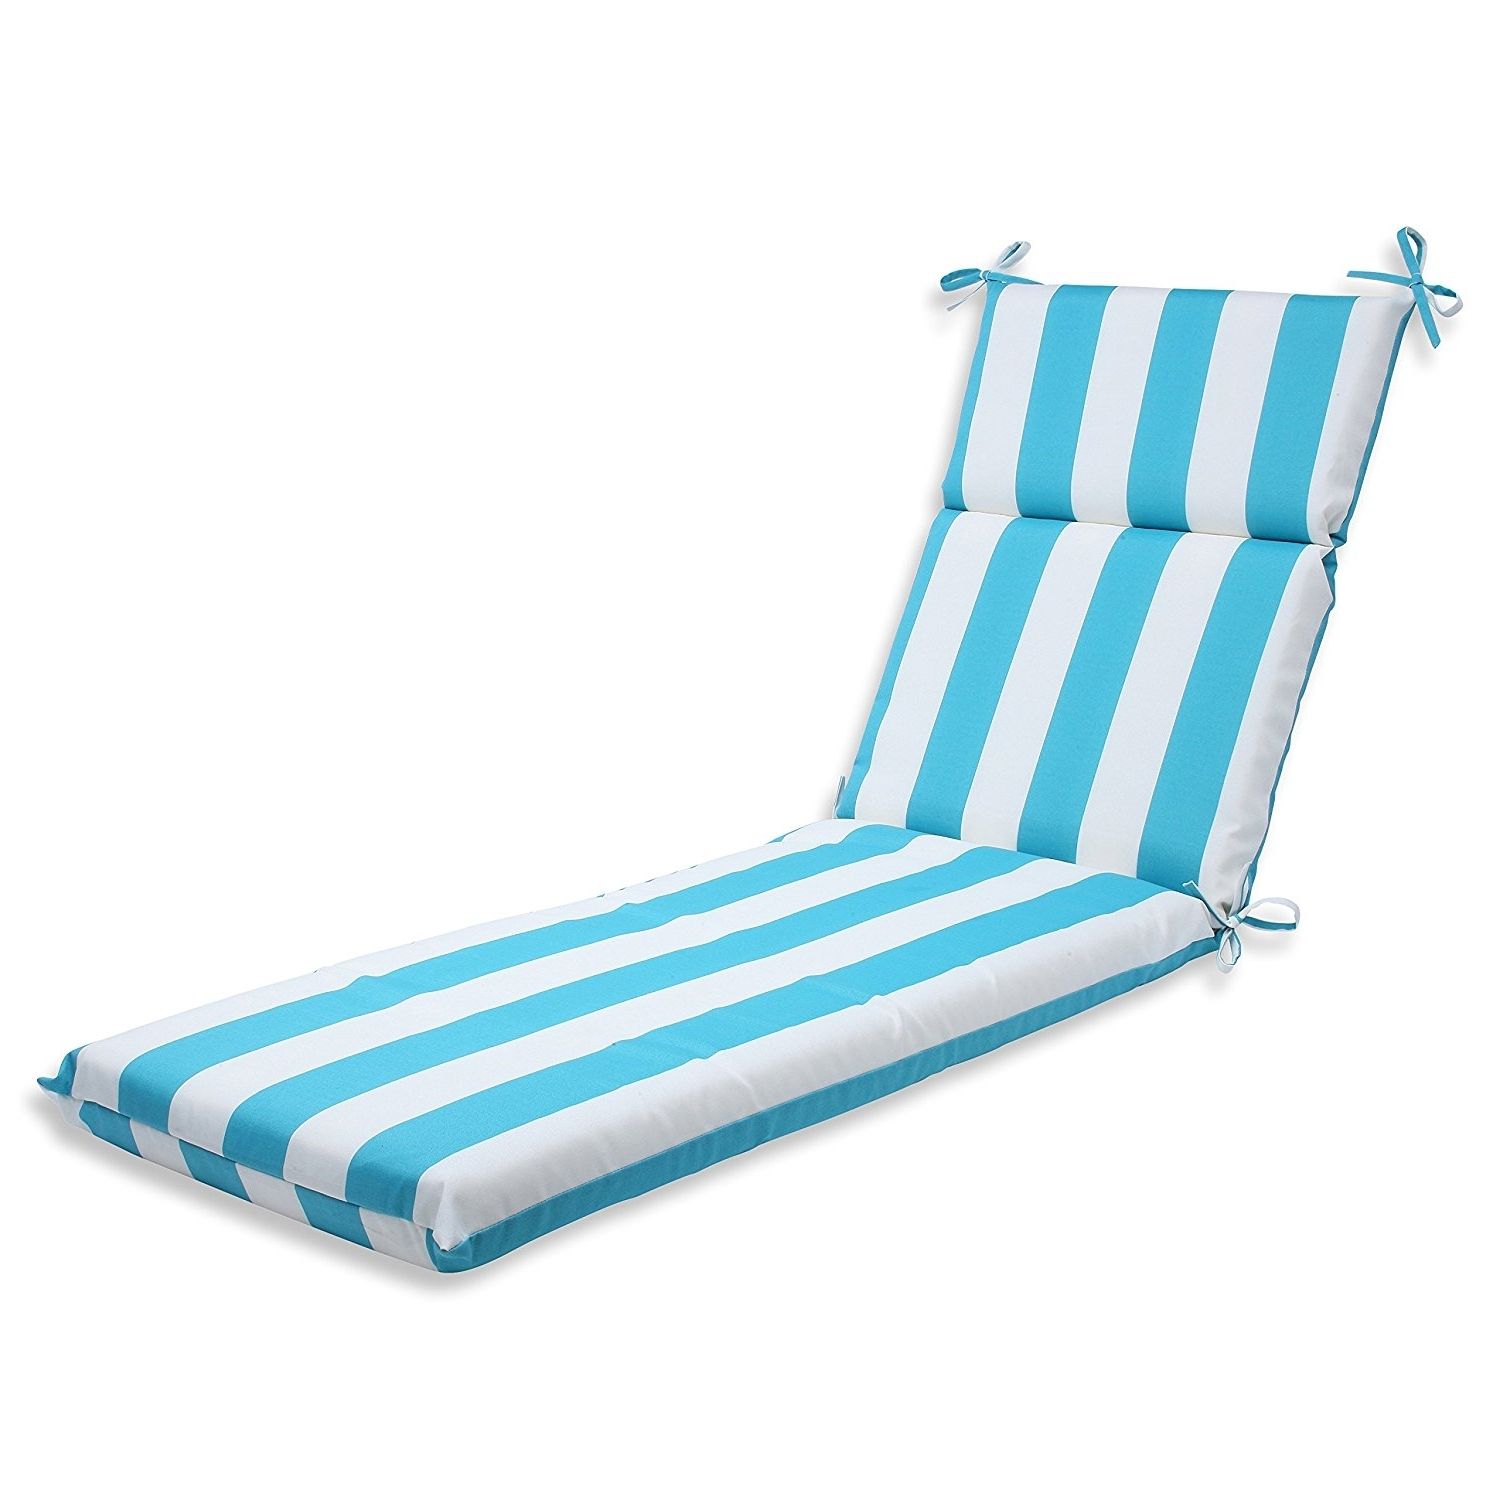 Amazon: Pillow Perfect Outdoor Cabana Stripe Chaise Lounge For Favorite Chaise Lounge Chair Outdoor Cushions (View 13 of 15)